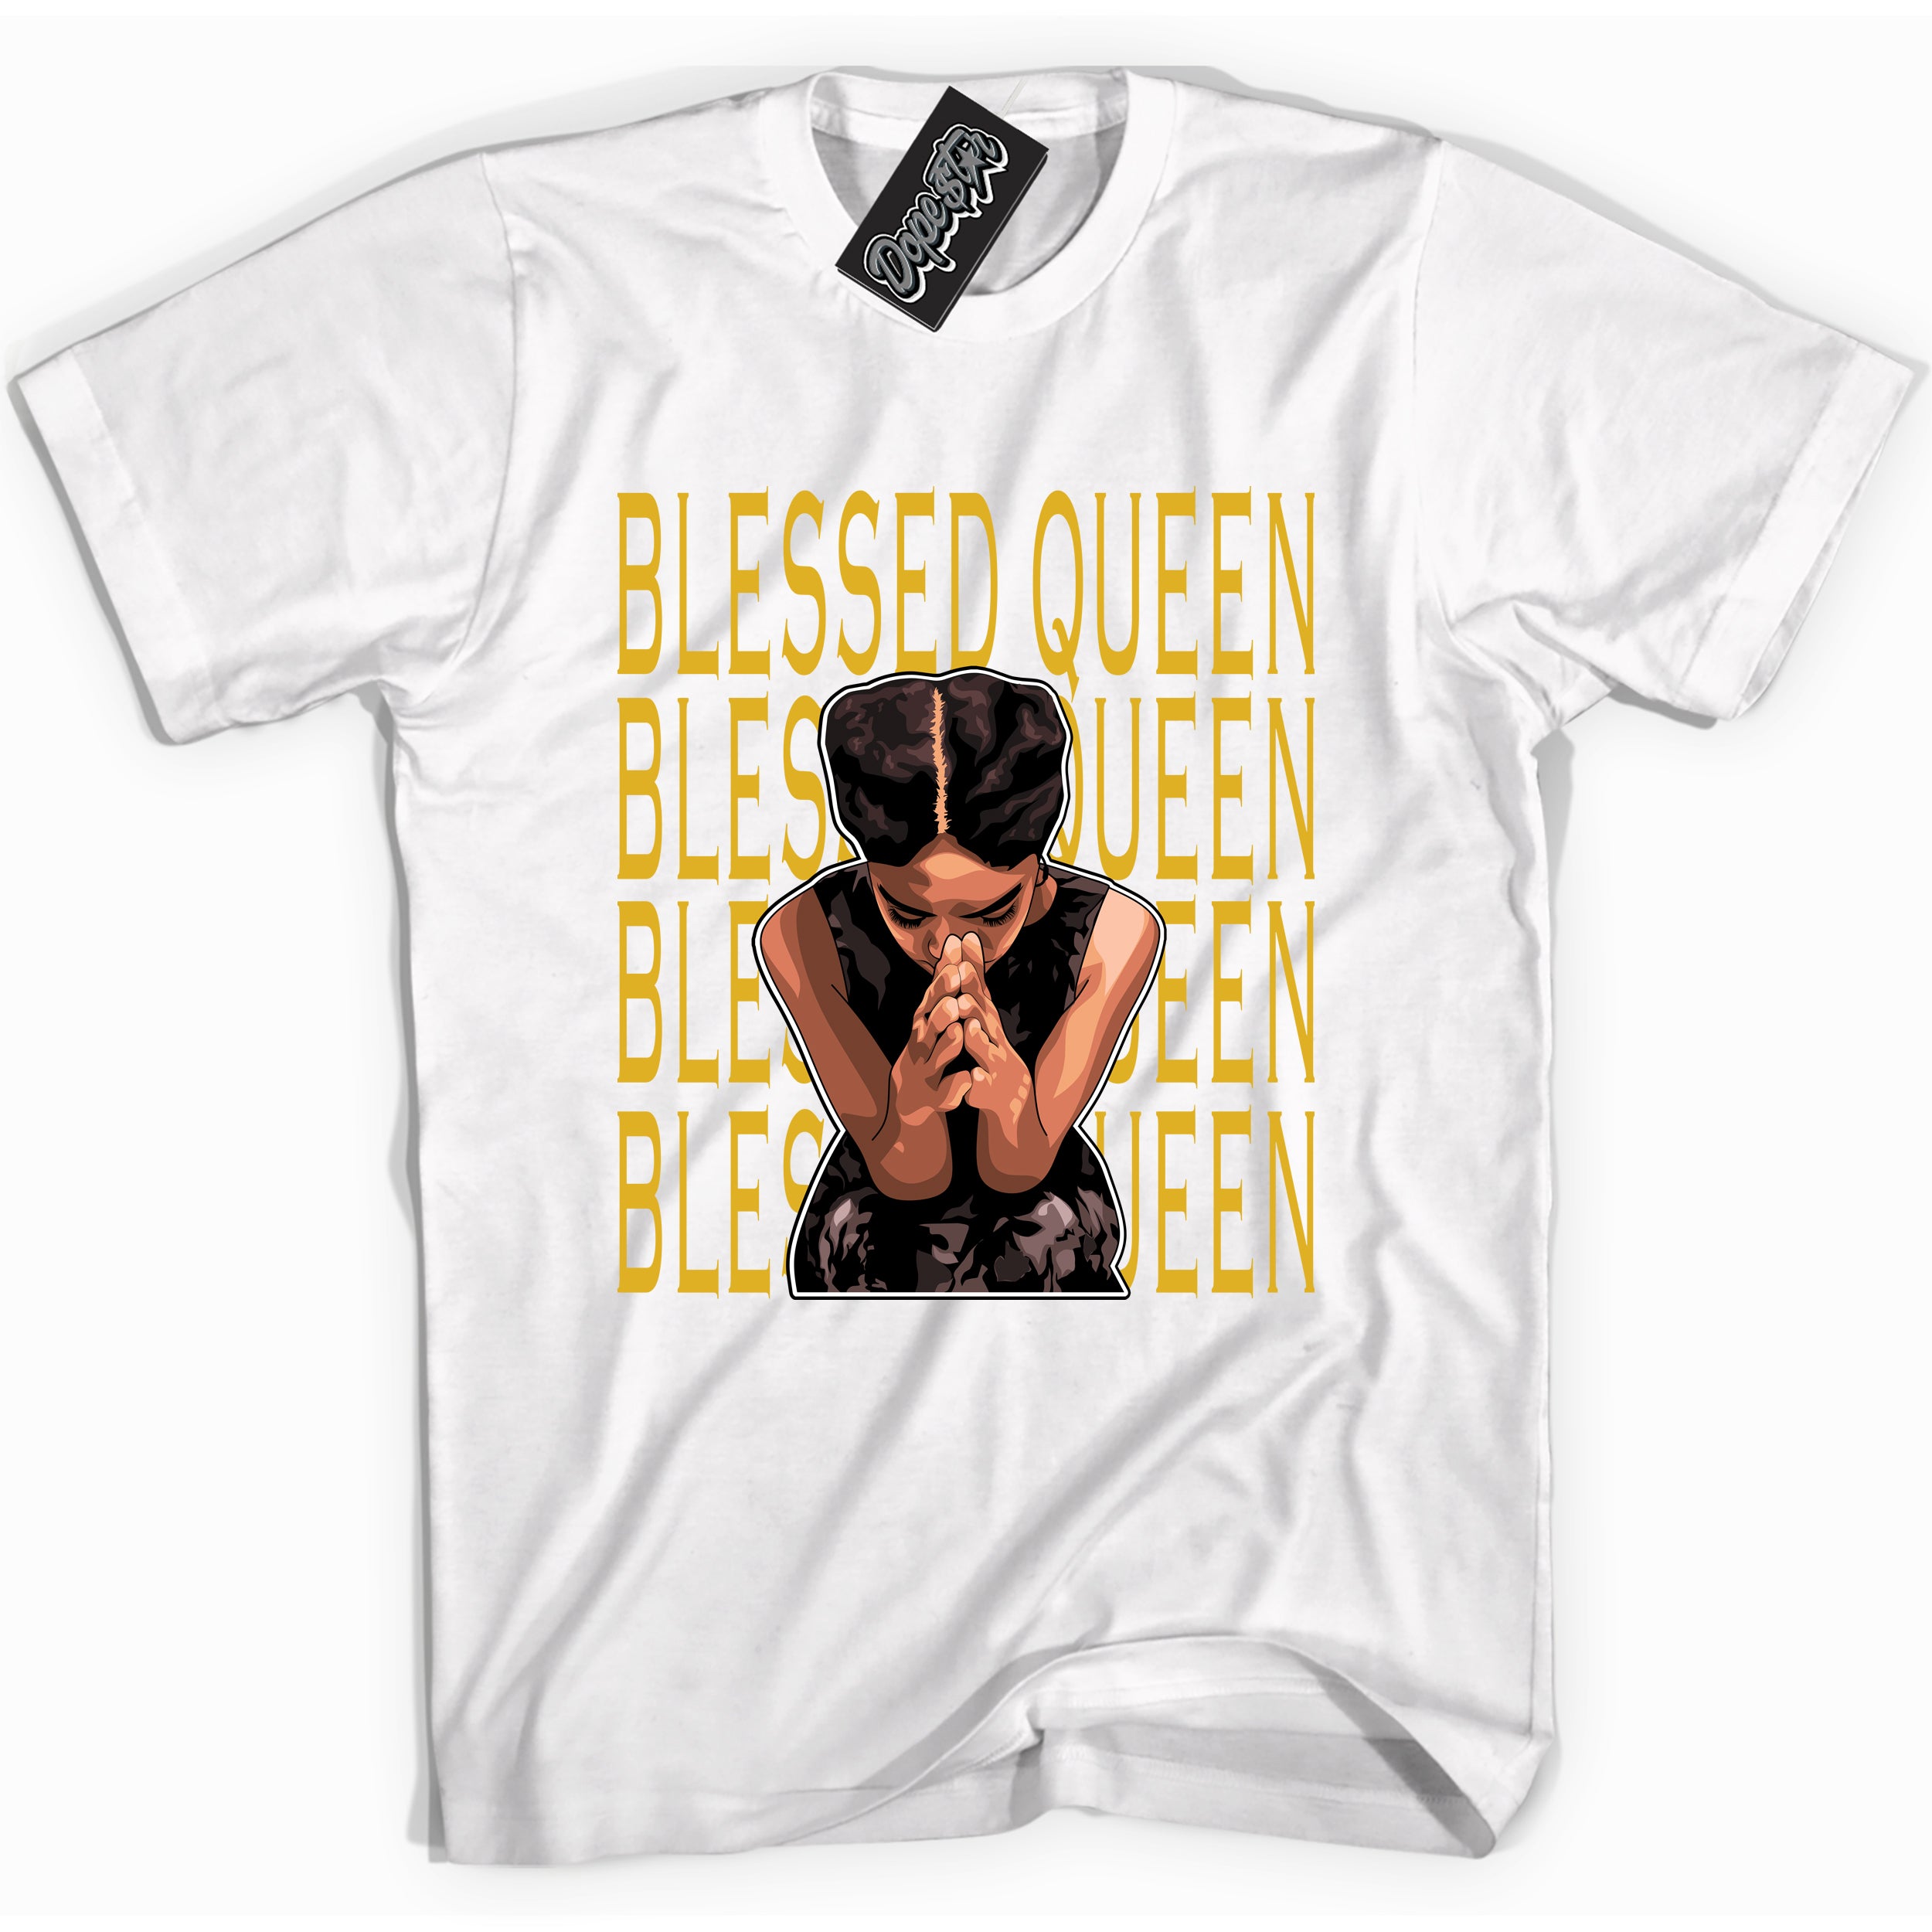 Cool White Shirt with “ Blessed Queen” design that perfectly matches Yellow Ochre 6s Sneakers.